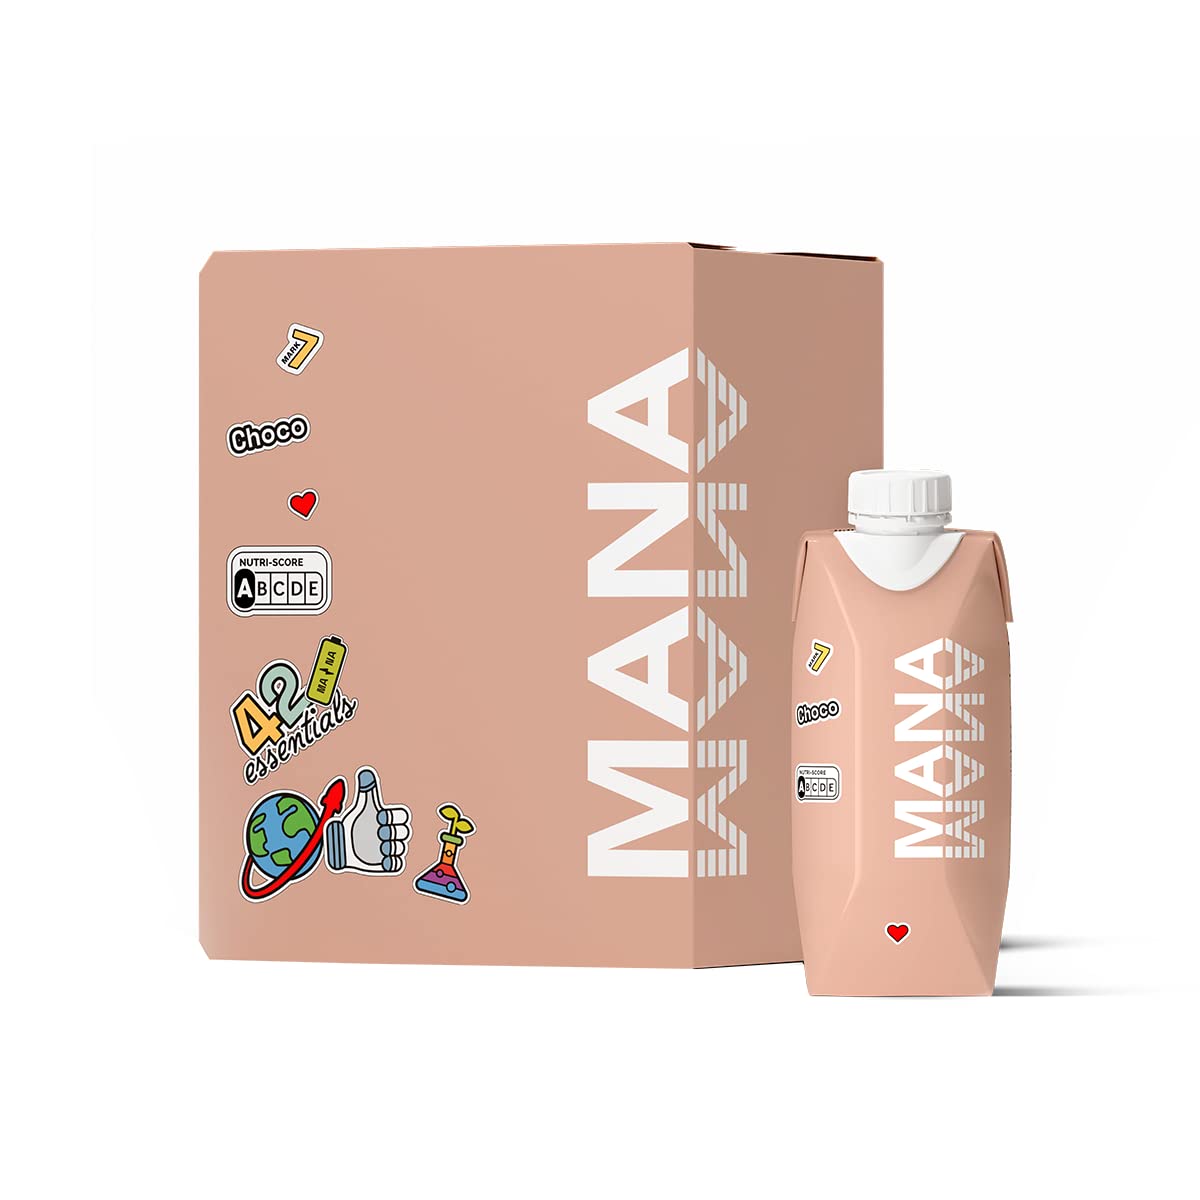 Mana Drink - Plant Based Meal Replacement 12 x 330ml, Nutritionally Complete Food, Ready to Drink, Vegan Breakfast Superfood, Non GMO. 12 Meals x 3...